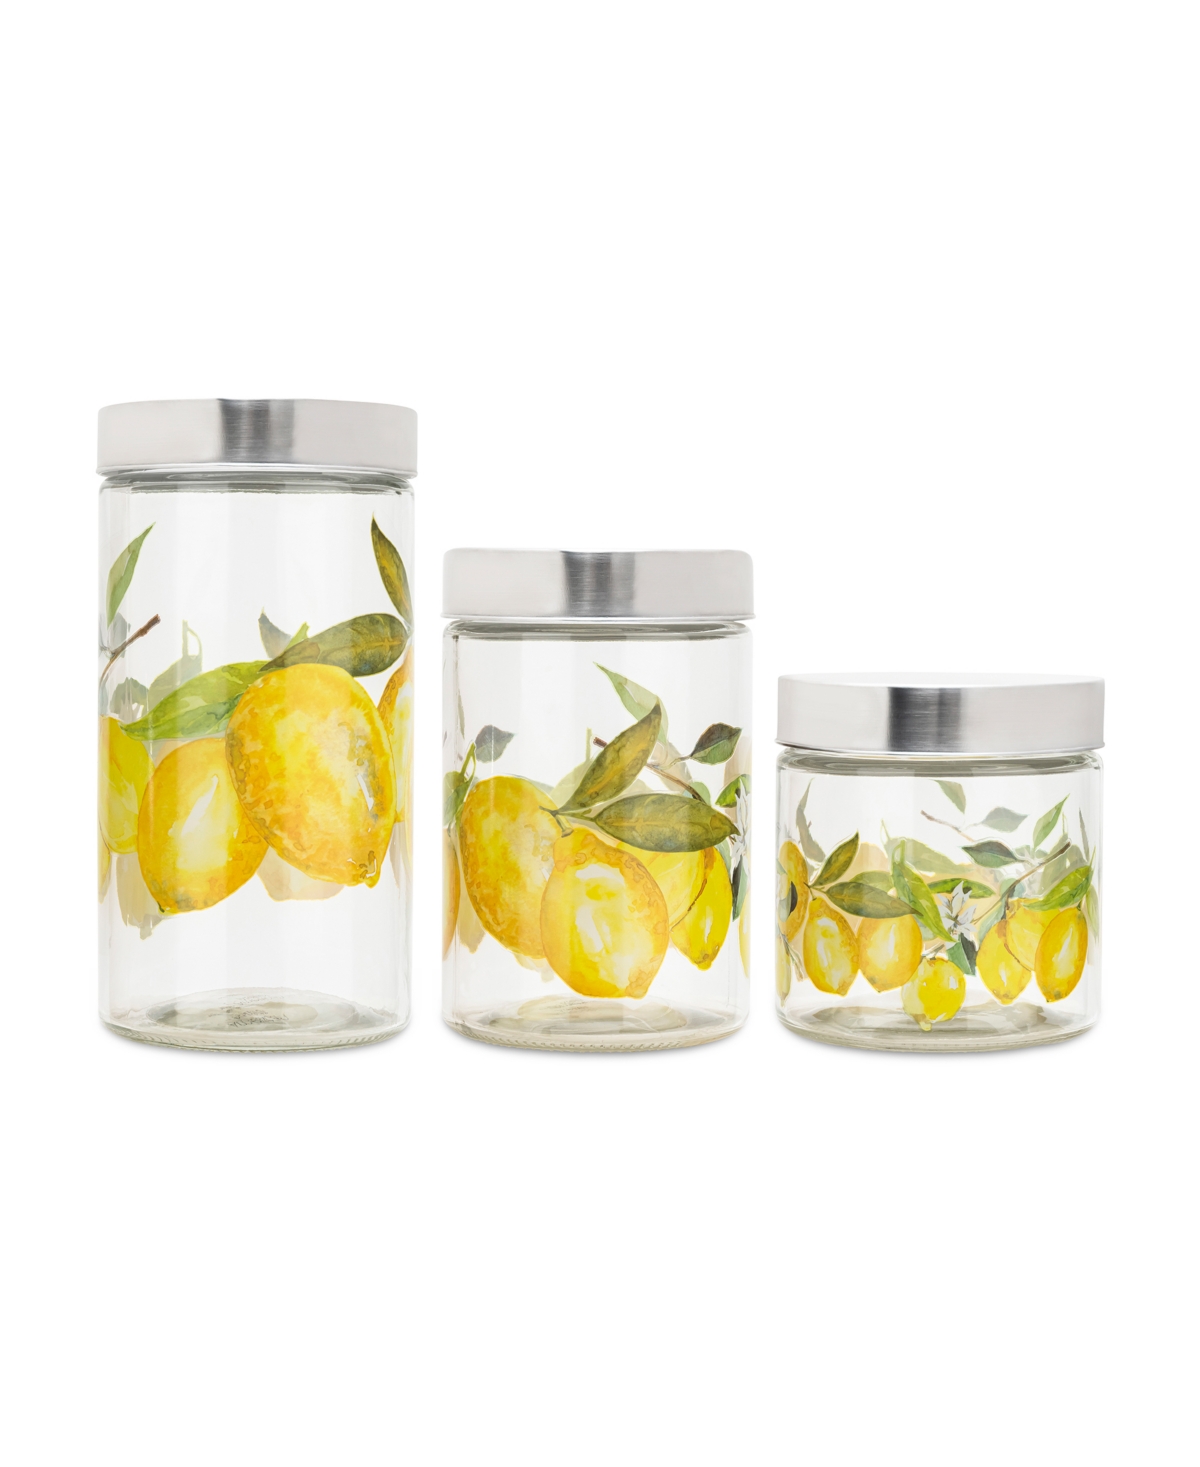 American Atelier Lemon Branches Glass Canisters Set, 3 Piece In Clear